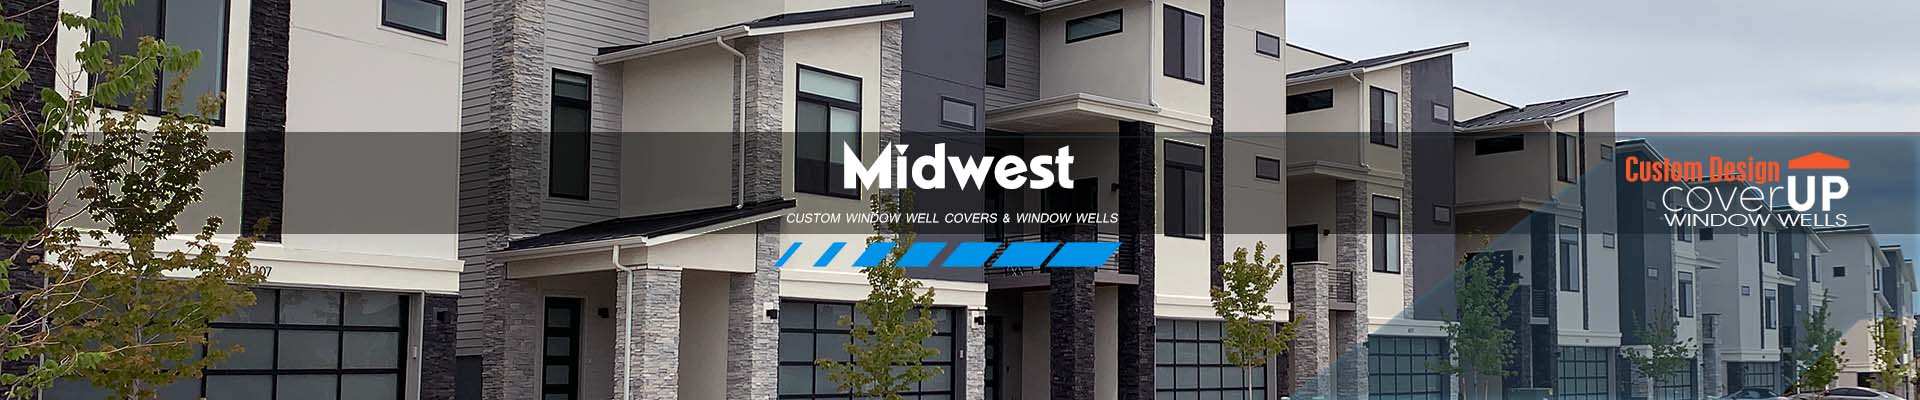 Midwest Basement Window Well Covers Companies